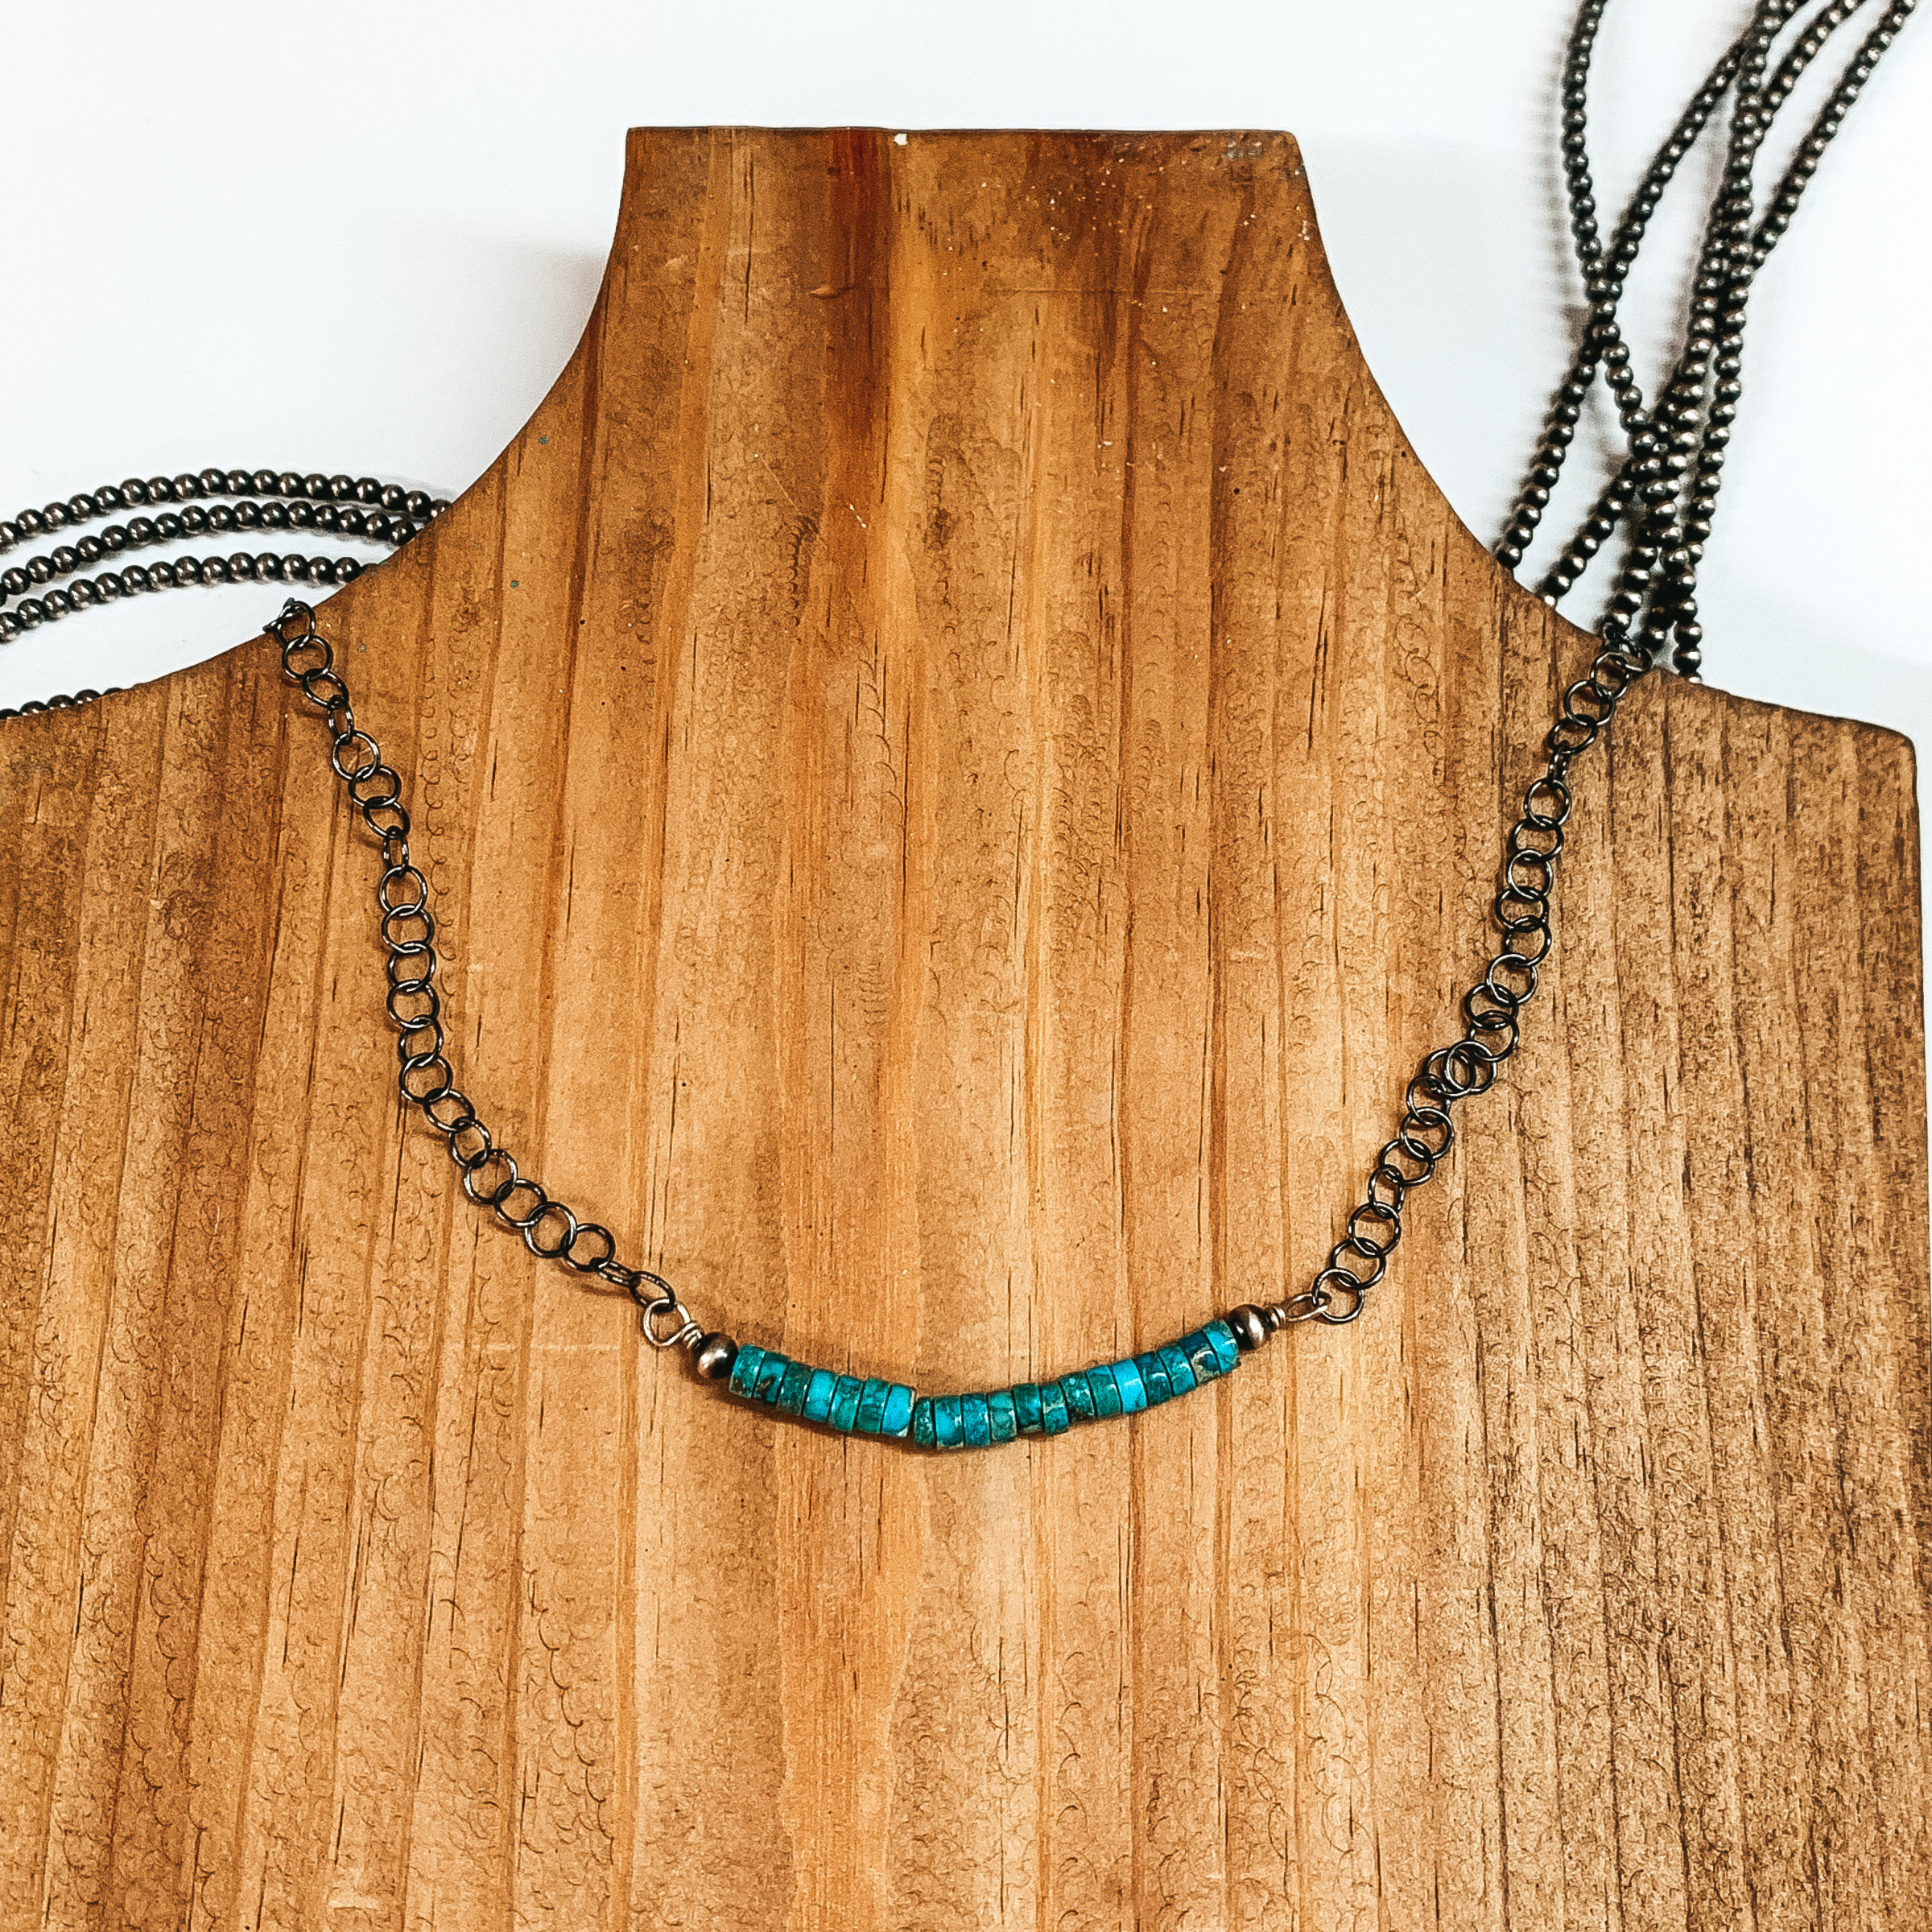 Corraine Smith | Navajo Handmade Sterling Silver Chain Necklace with Kingman Turquoise Beads - Giddy Up Glamour Boutique